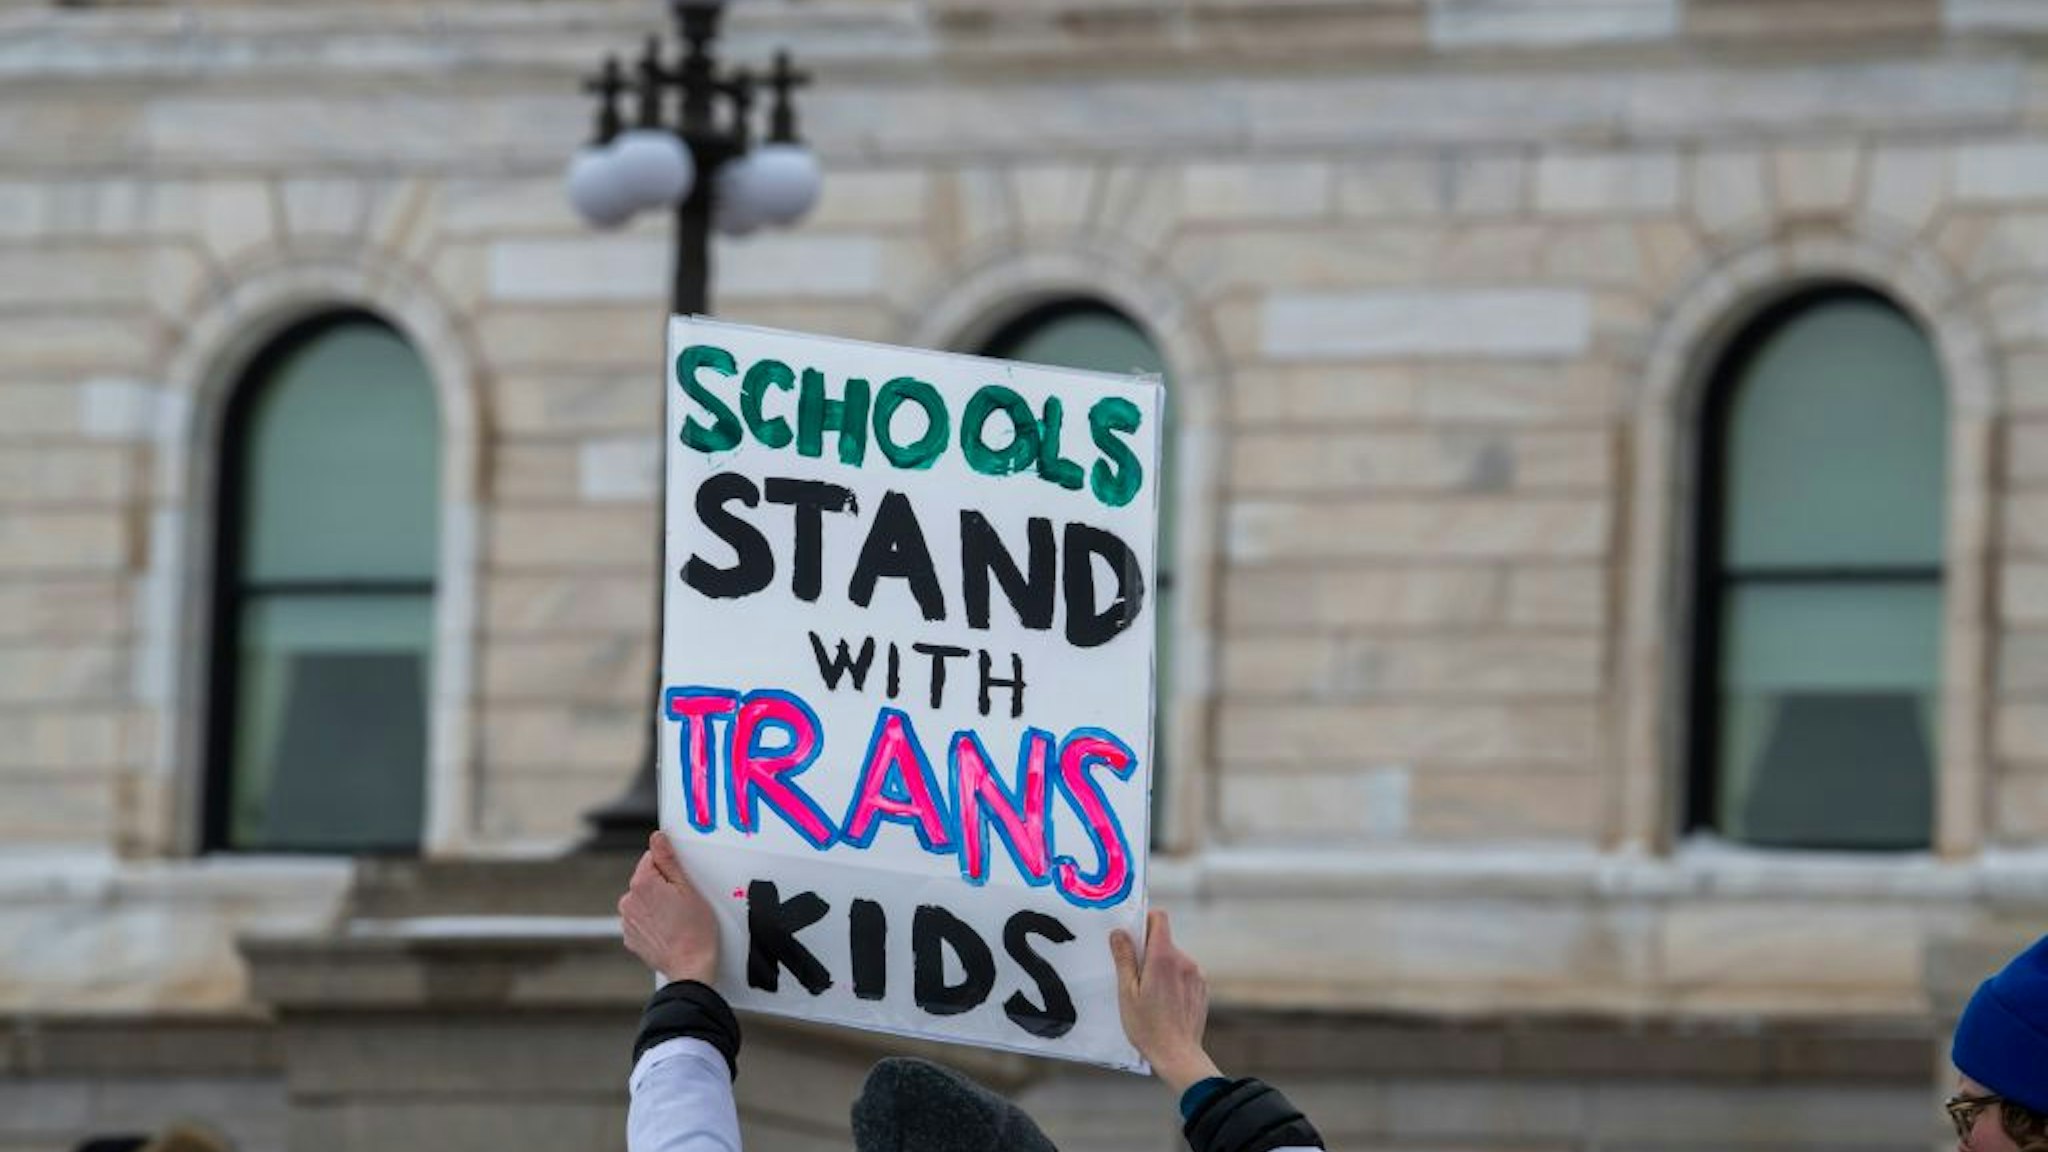 St. Paul, Minnesota. March 6, 2022. Because the attacks against transgender kids are increasing across the country Minneasotans hold a rally at the capitol to support trans kids in Minnesota, Texas, and around the country. (Photo by: Michael Siluk/UCG/Universal Images Group via Getty Images)